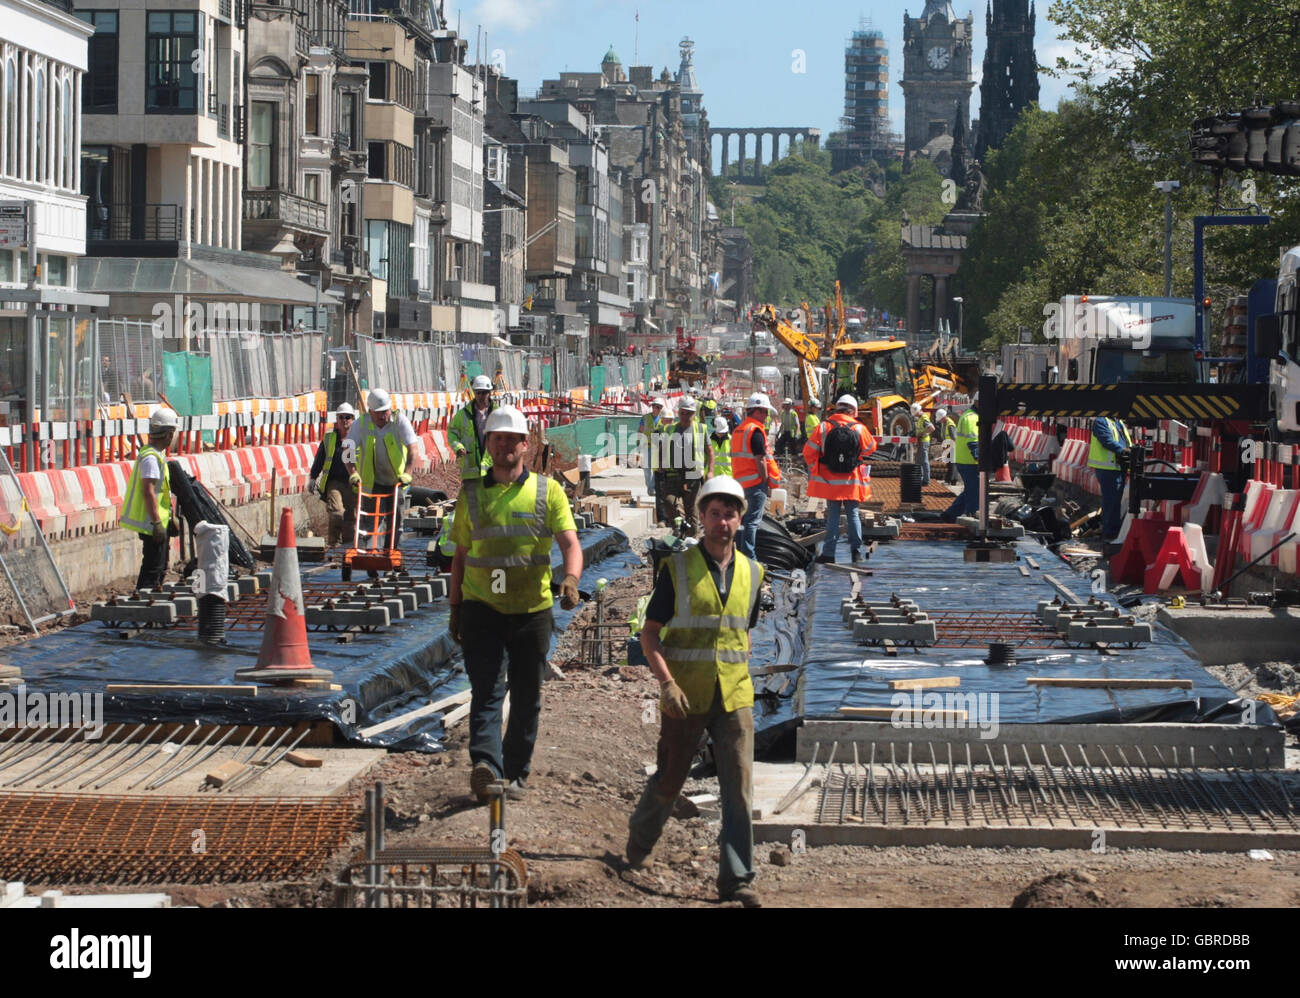 The first sections of tram track arrive on Princes Street, Edinburgh. Stock Photo